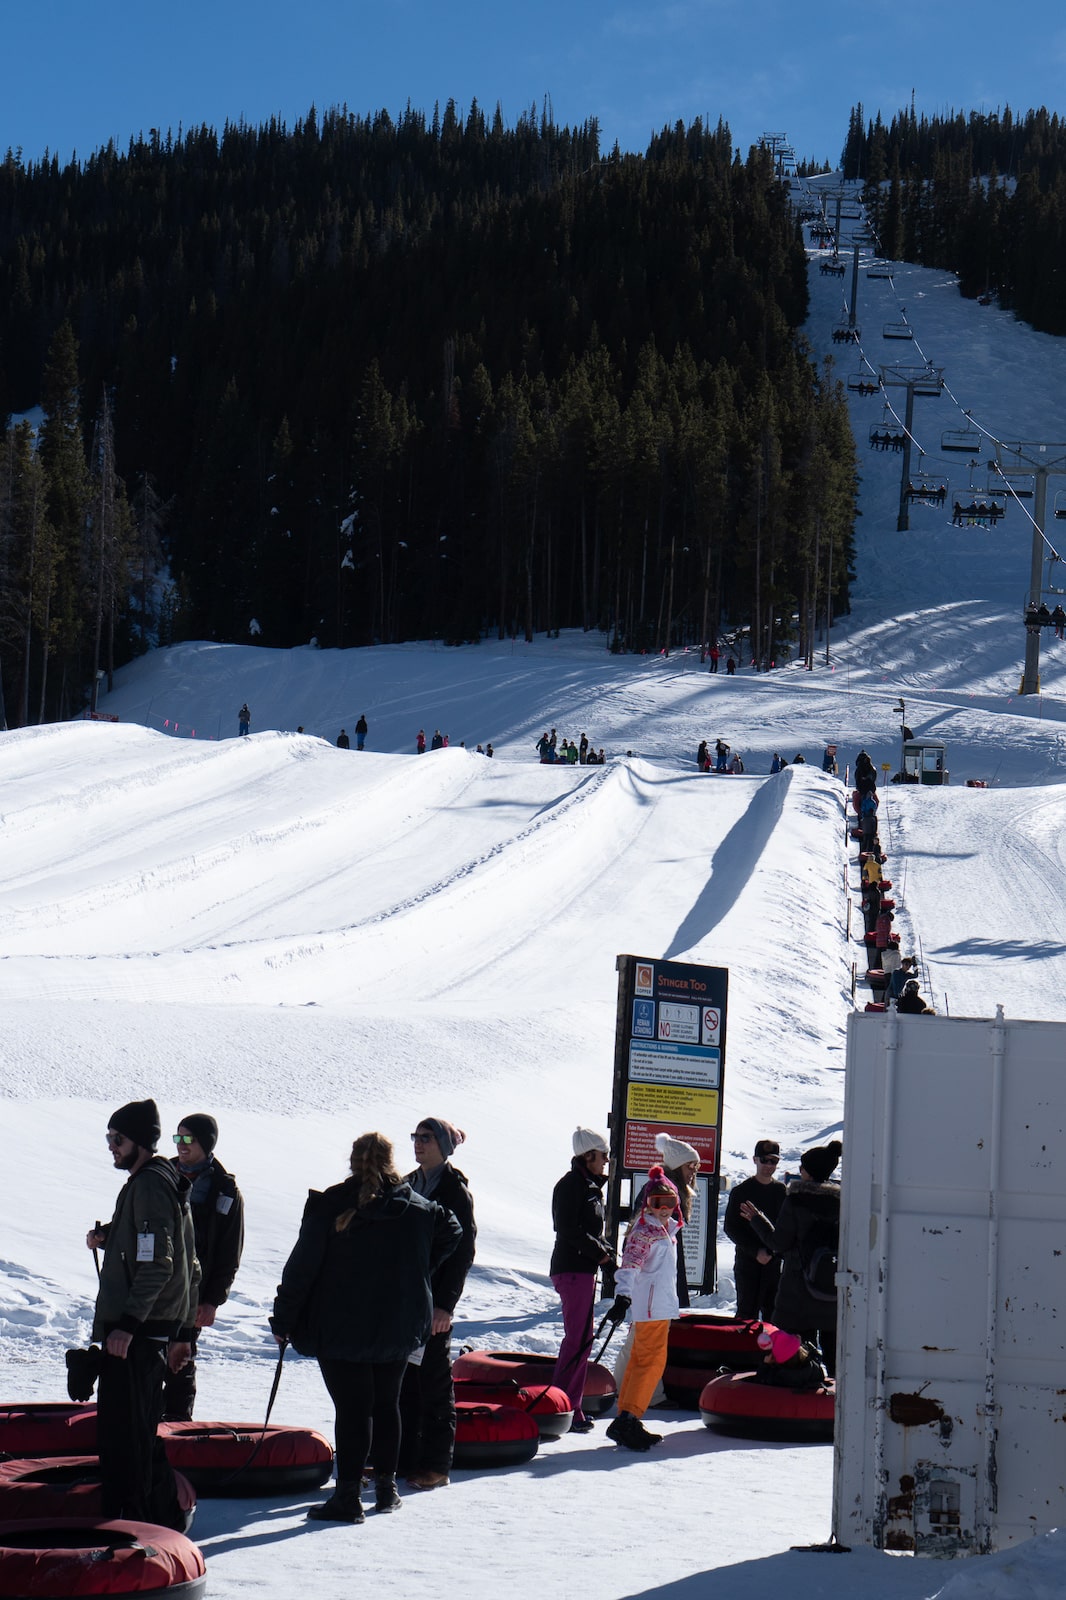 Riders queue up to ride snow tubing lift at Copper Mountain Resort